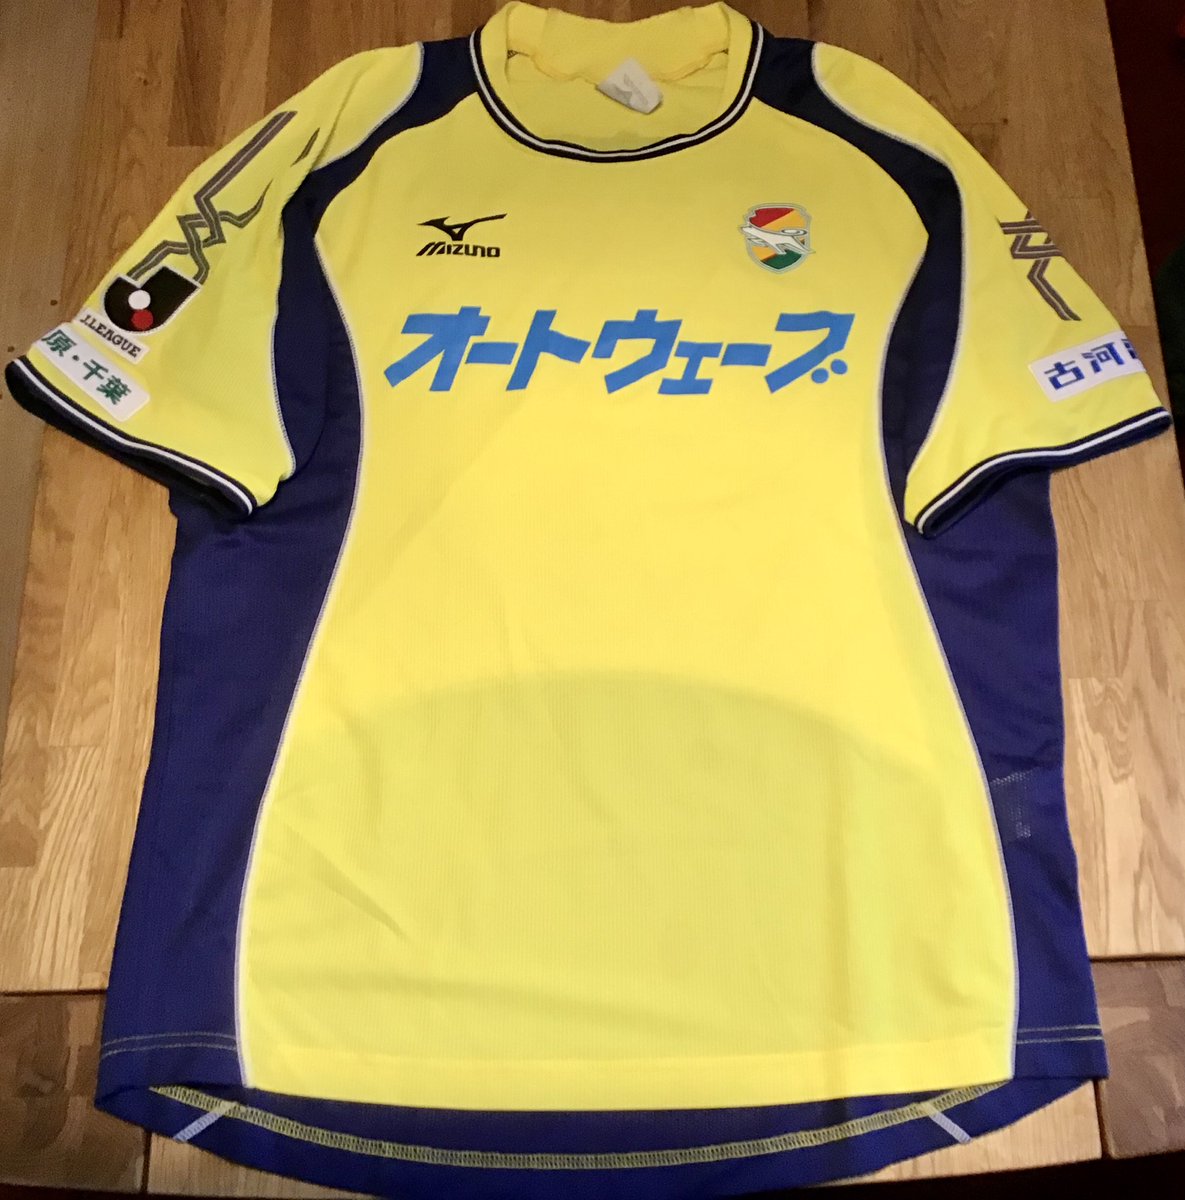 Nagoya's special uniform reminds me of Mizuno's template from 2005 😄